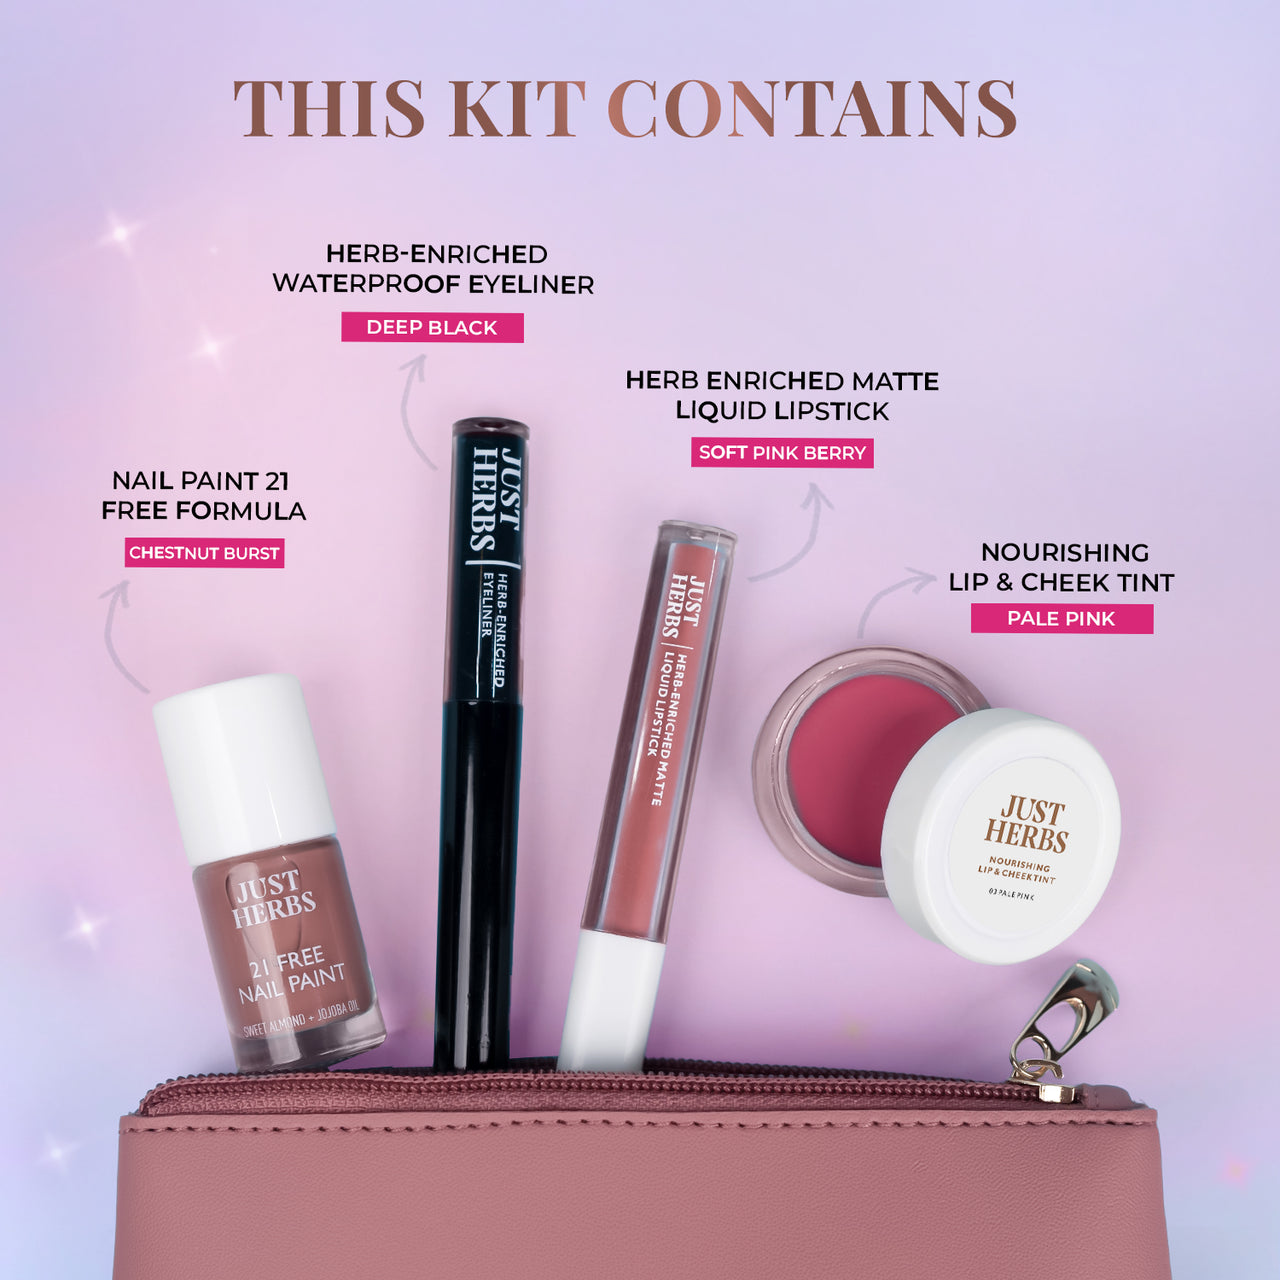 All in One Glam Kit